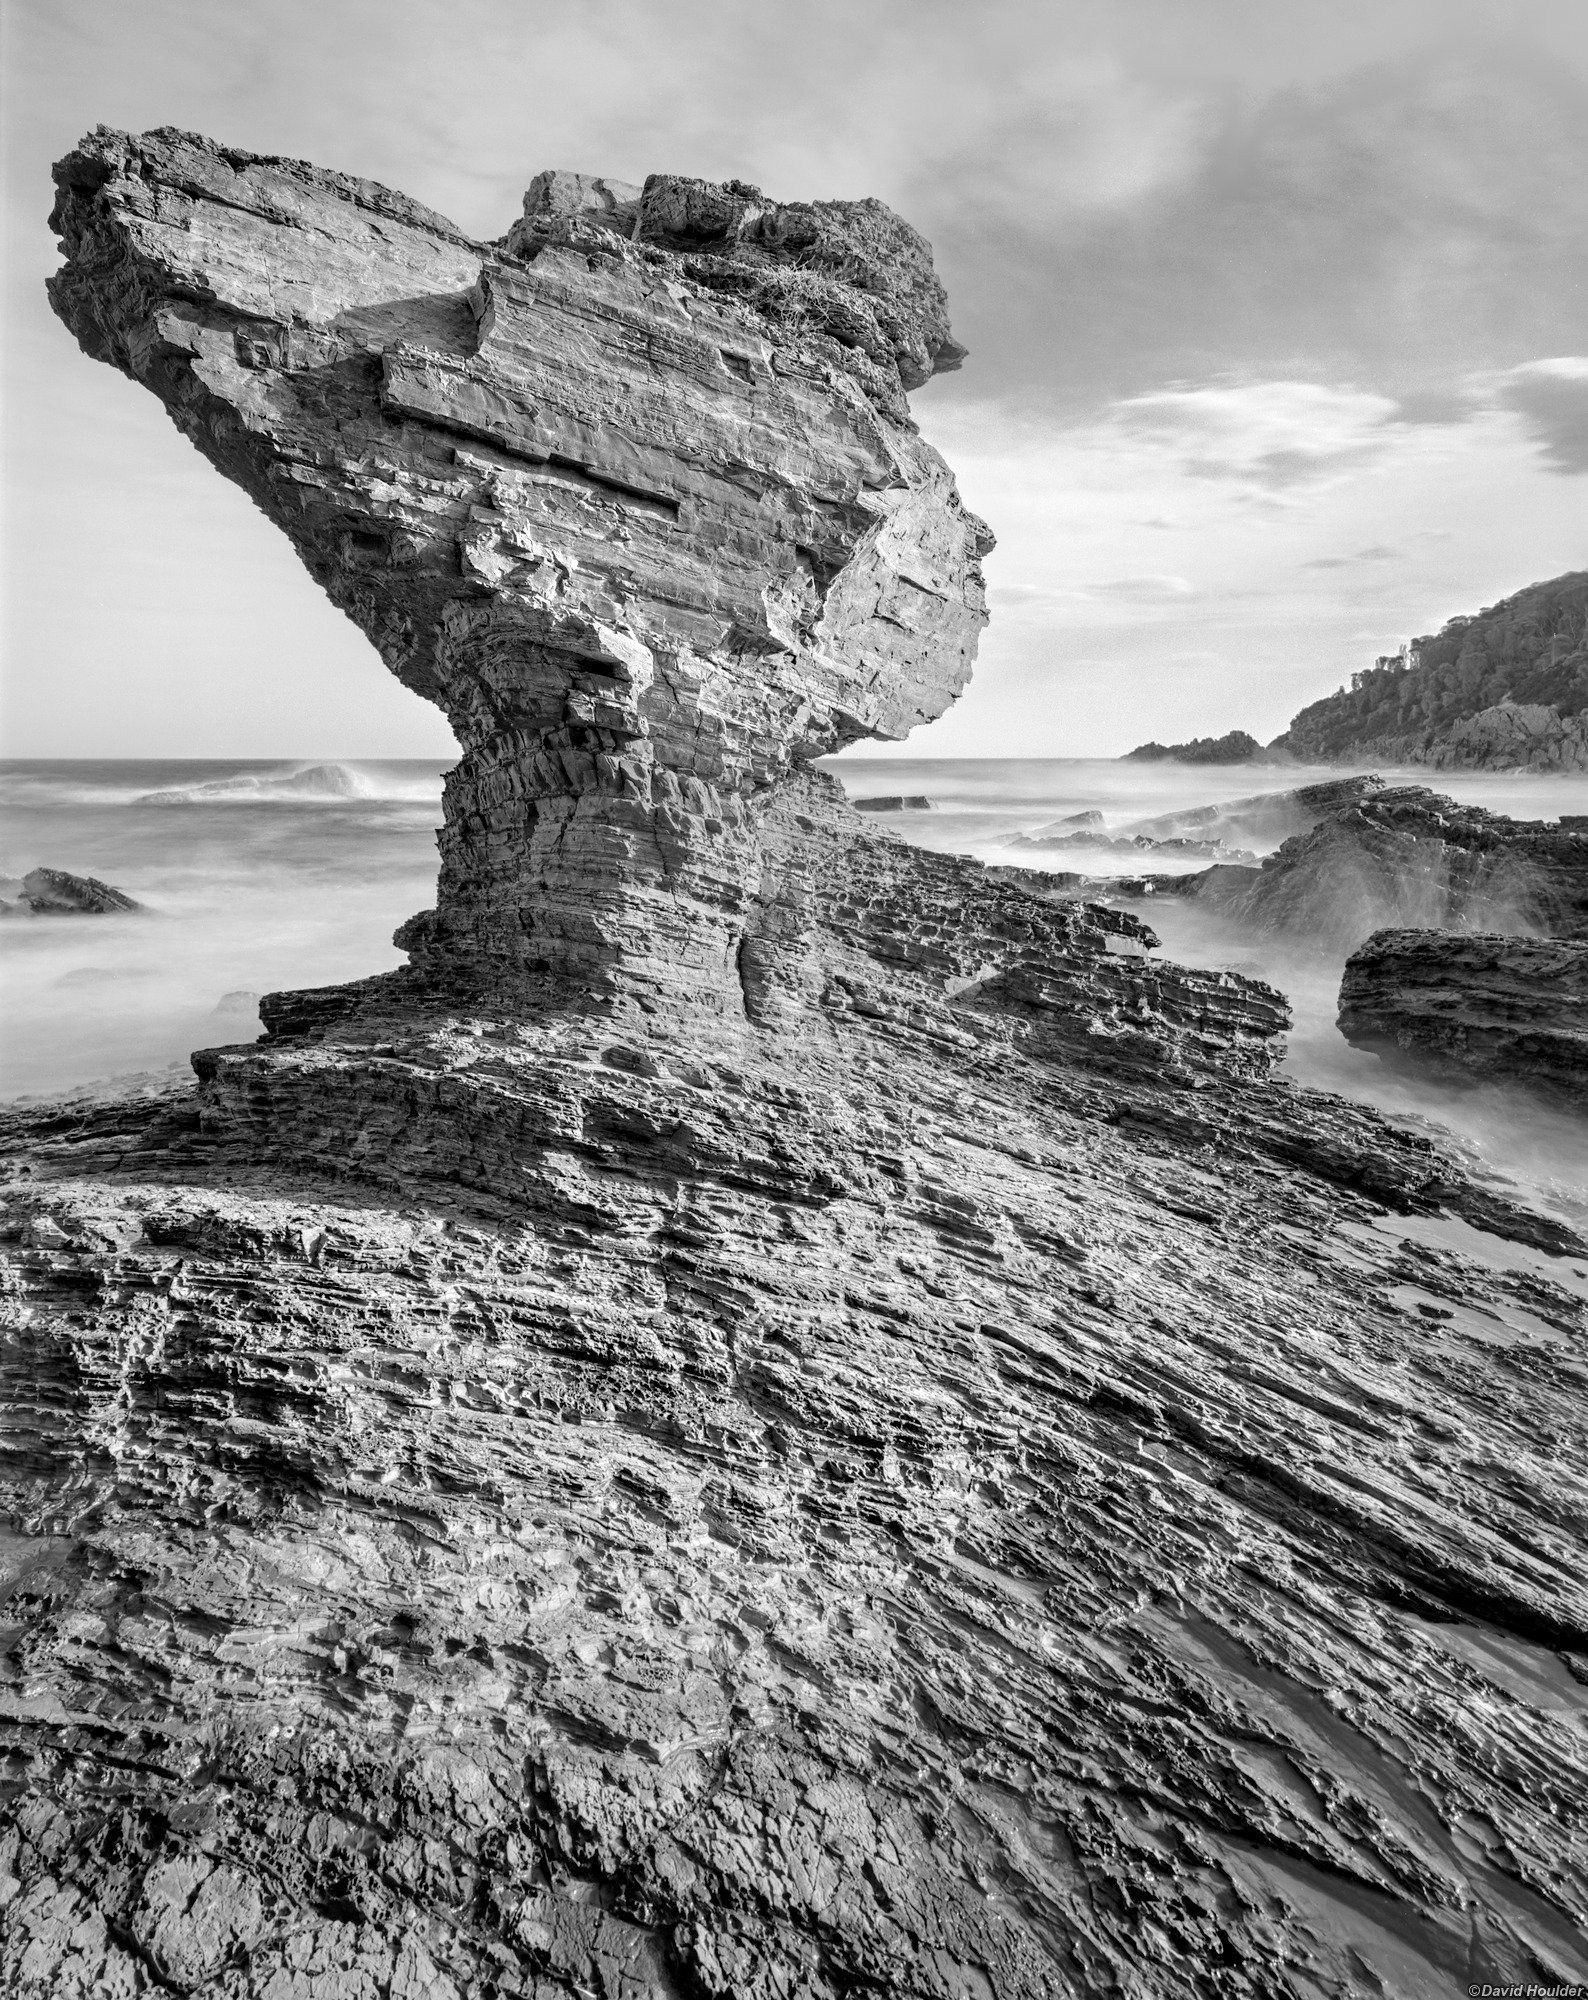 An angular rock formation protruding from a rock shelf with the ocean behind